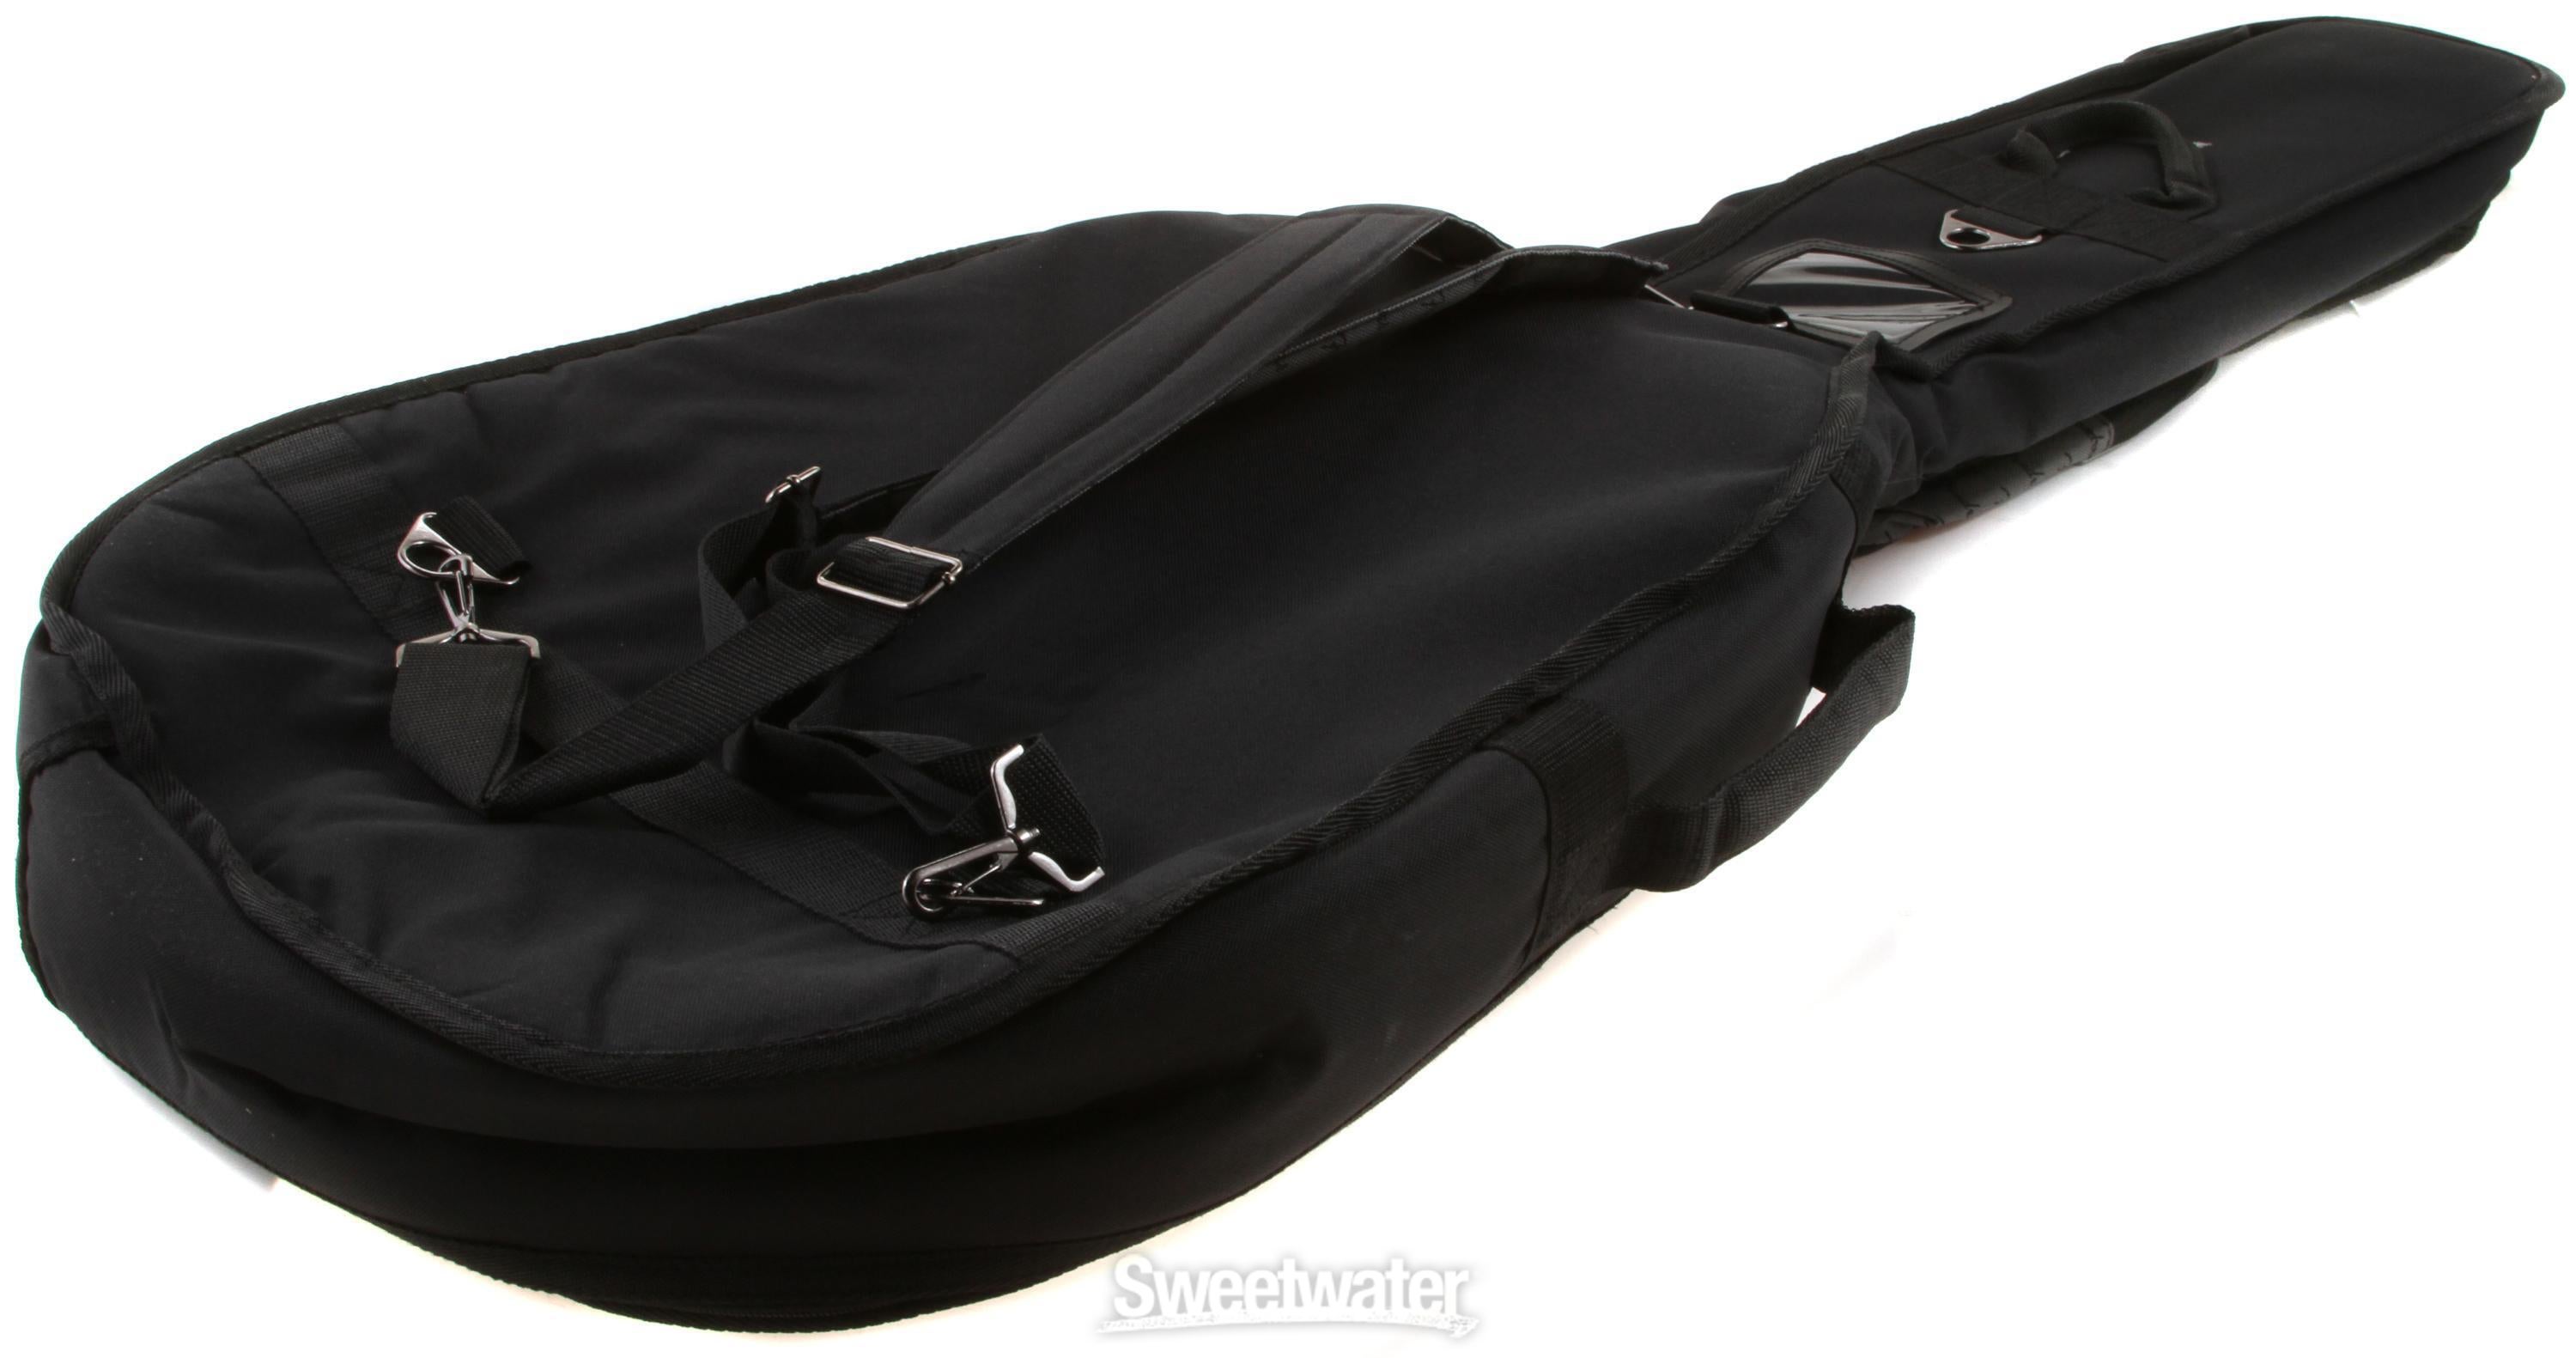 Fender Deluxe Gig Bag | Sweetwater